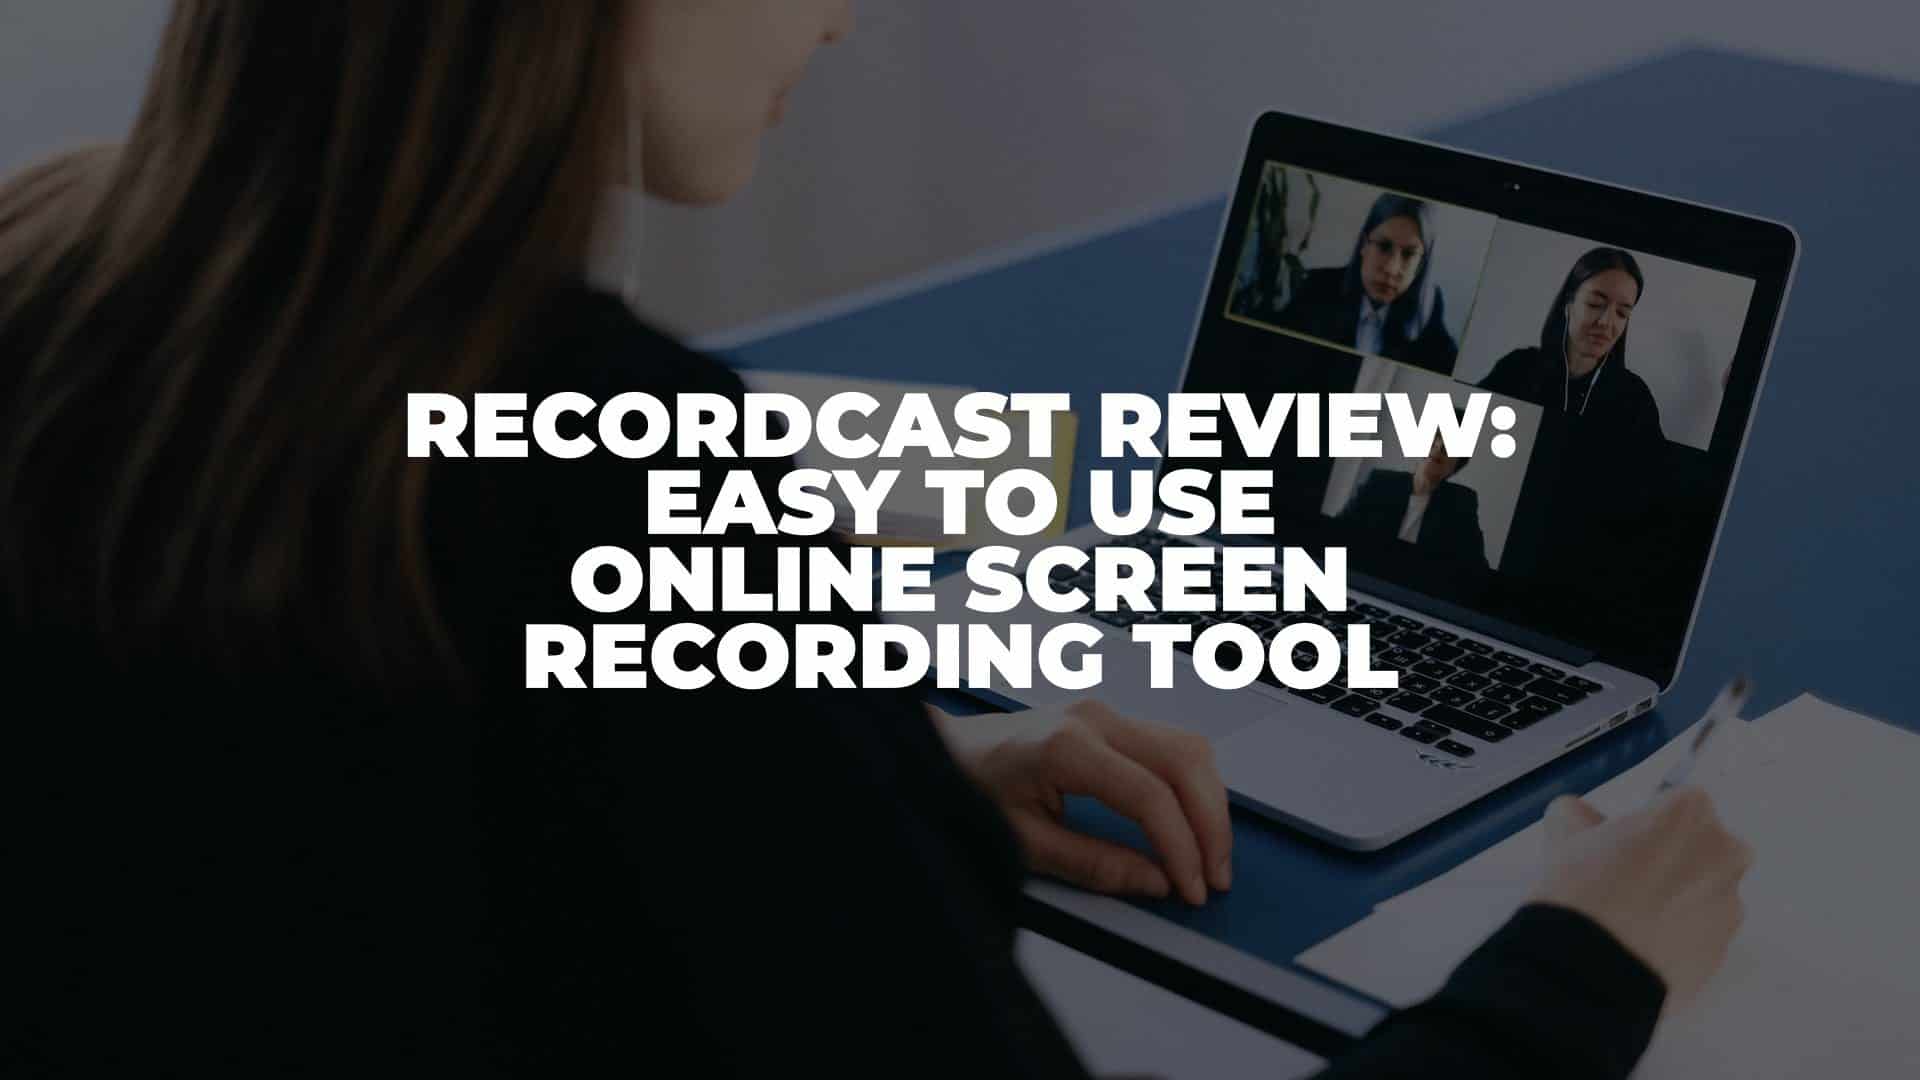 RecordCast Review - Featured Image